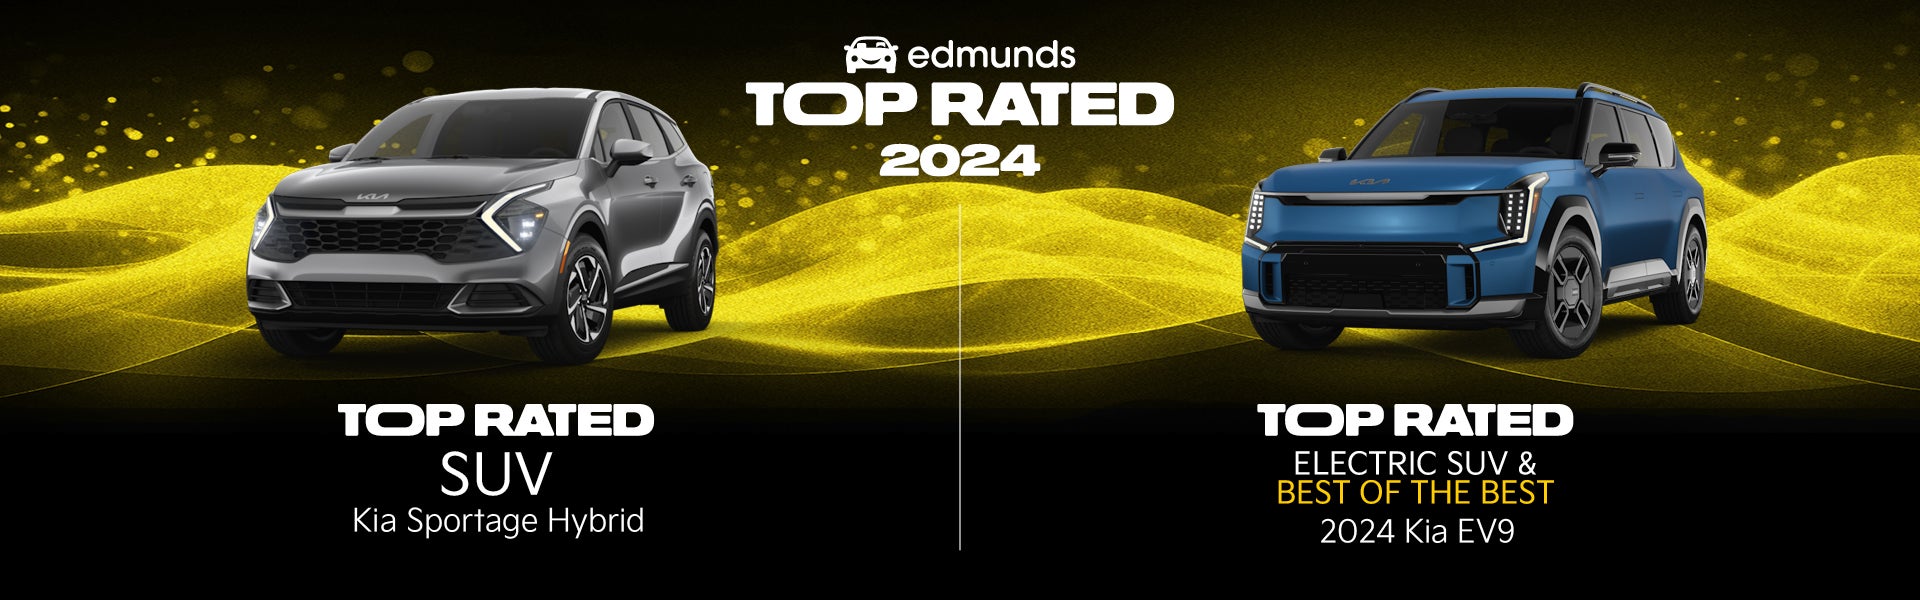 Edmunds Top Rated 2024!